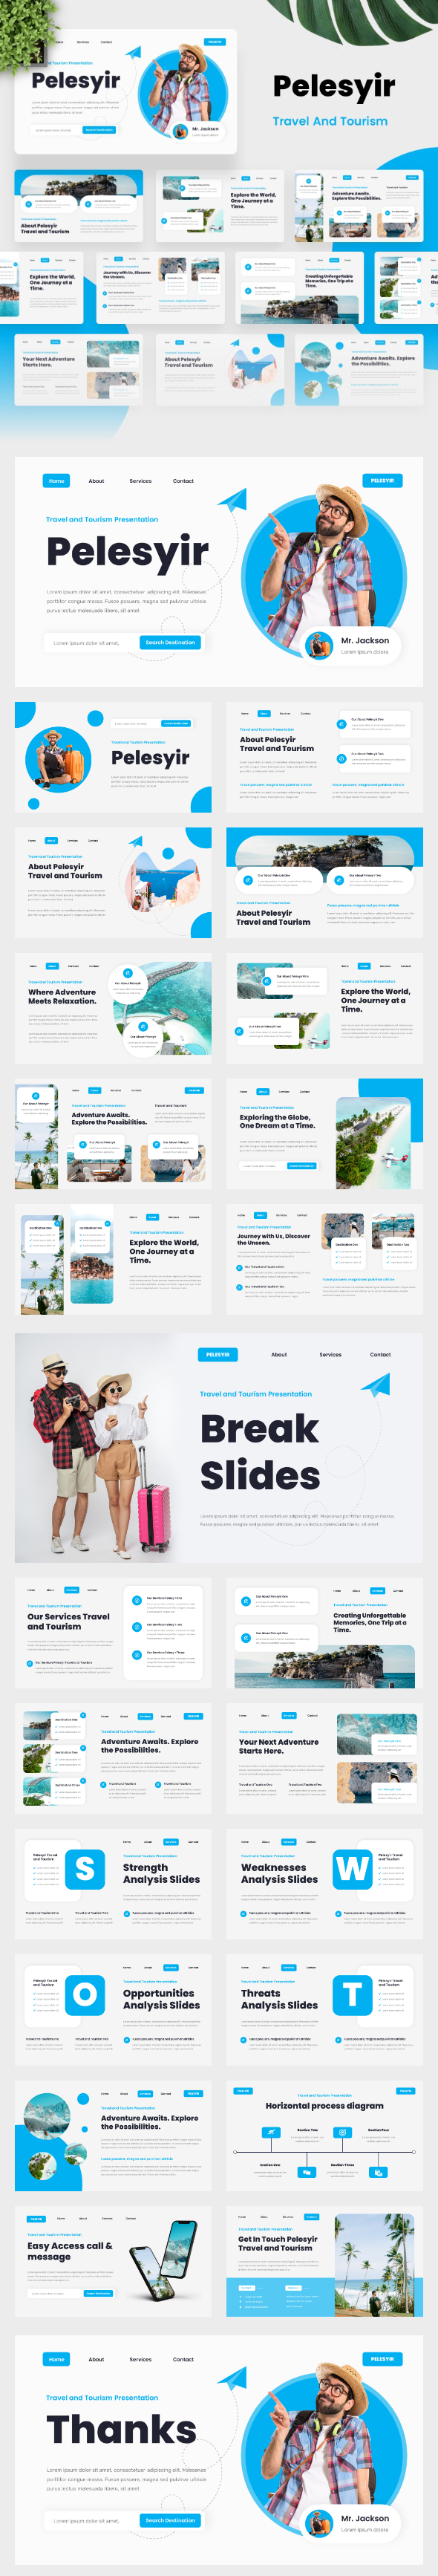 Pelesyir - Travel and Tourism Powerpoint Template